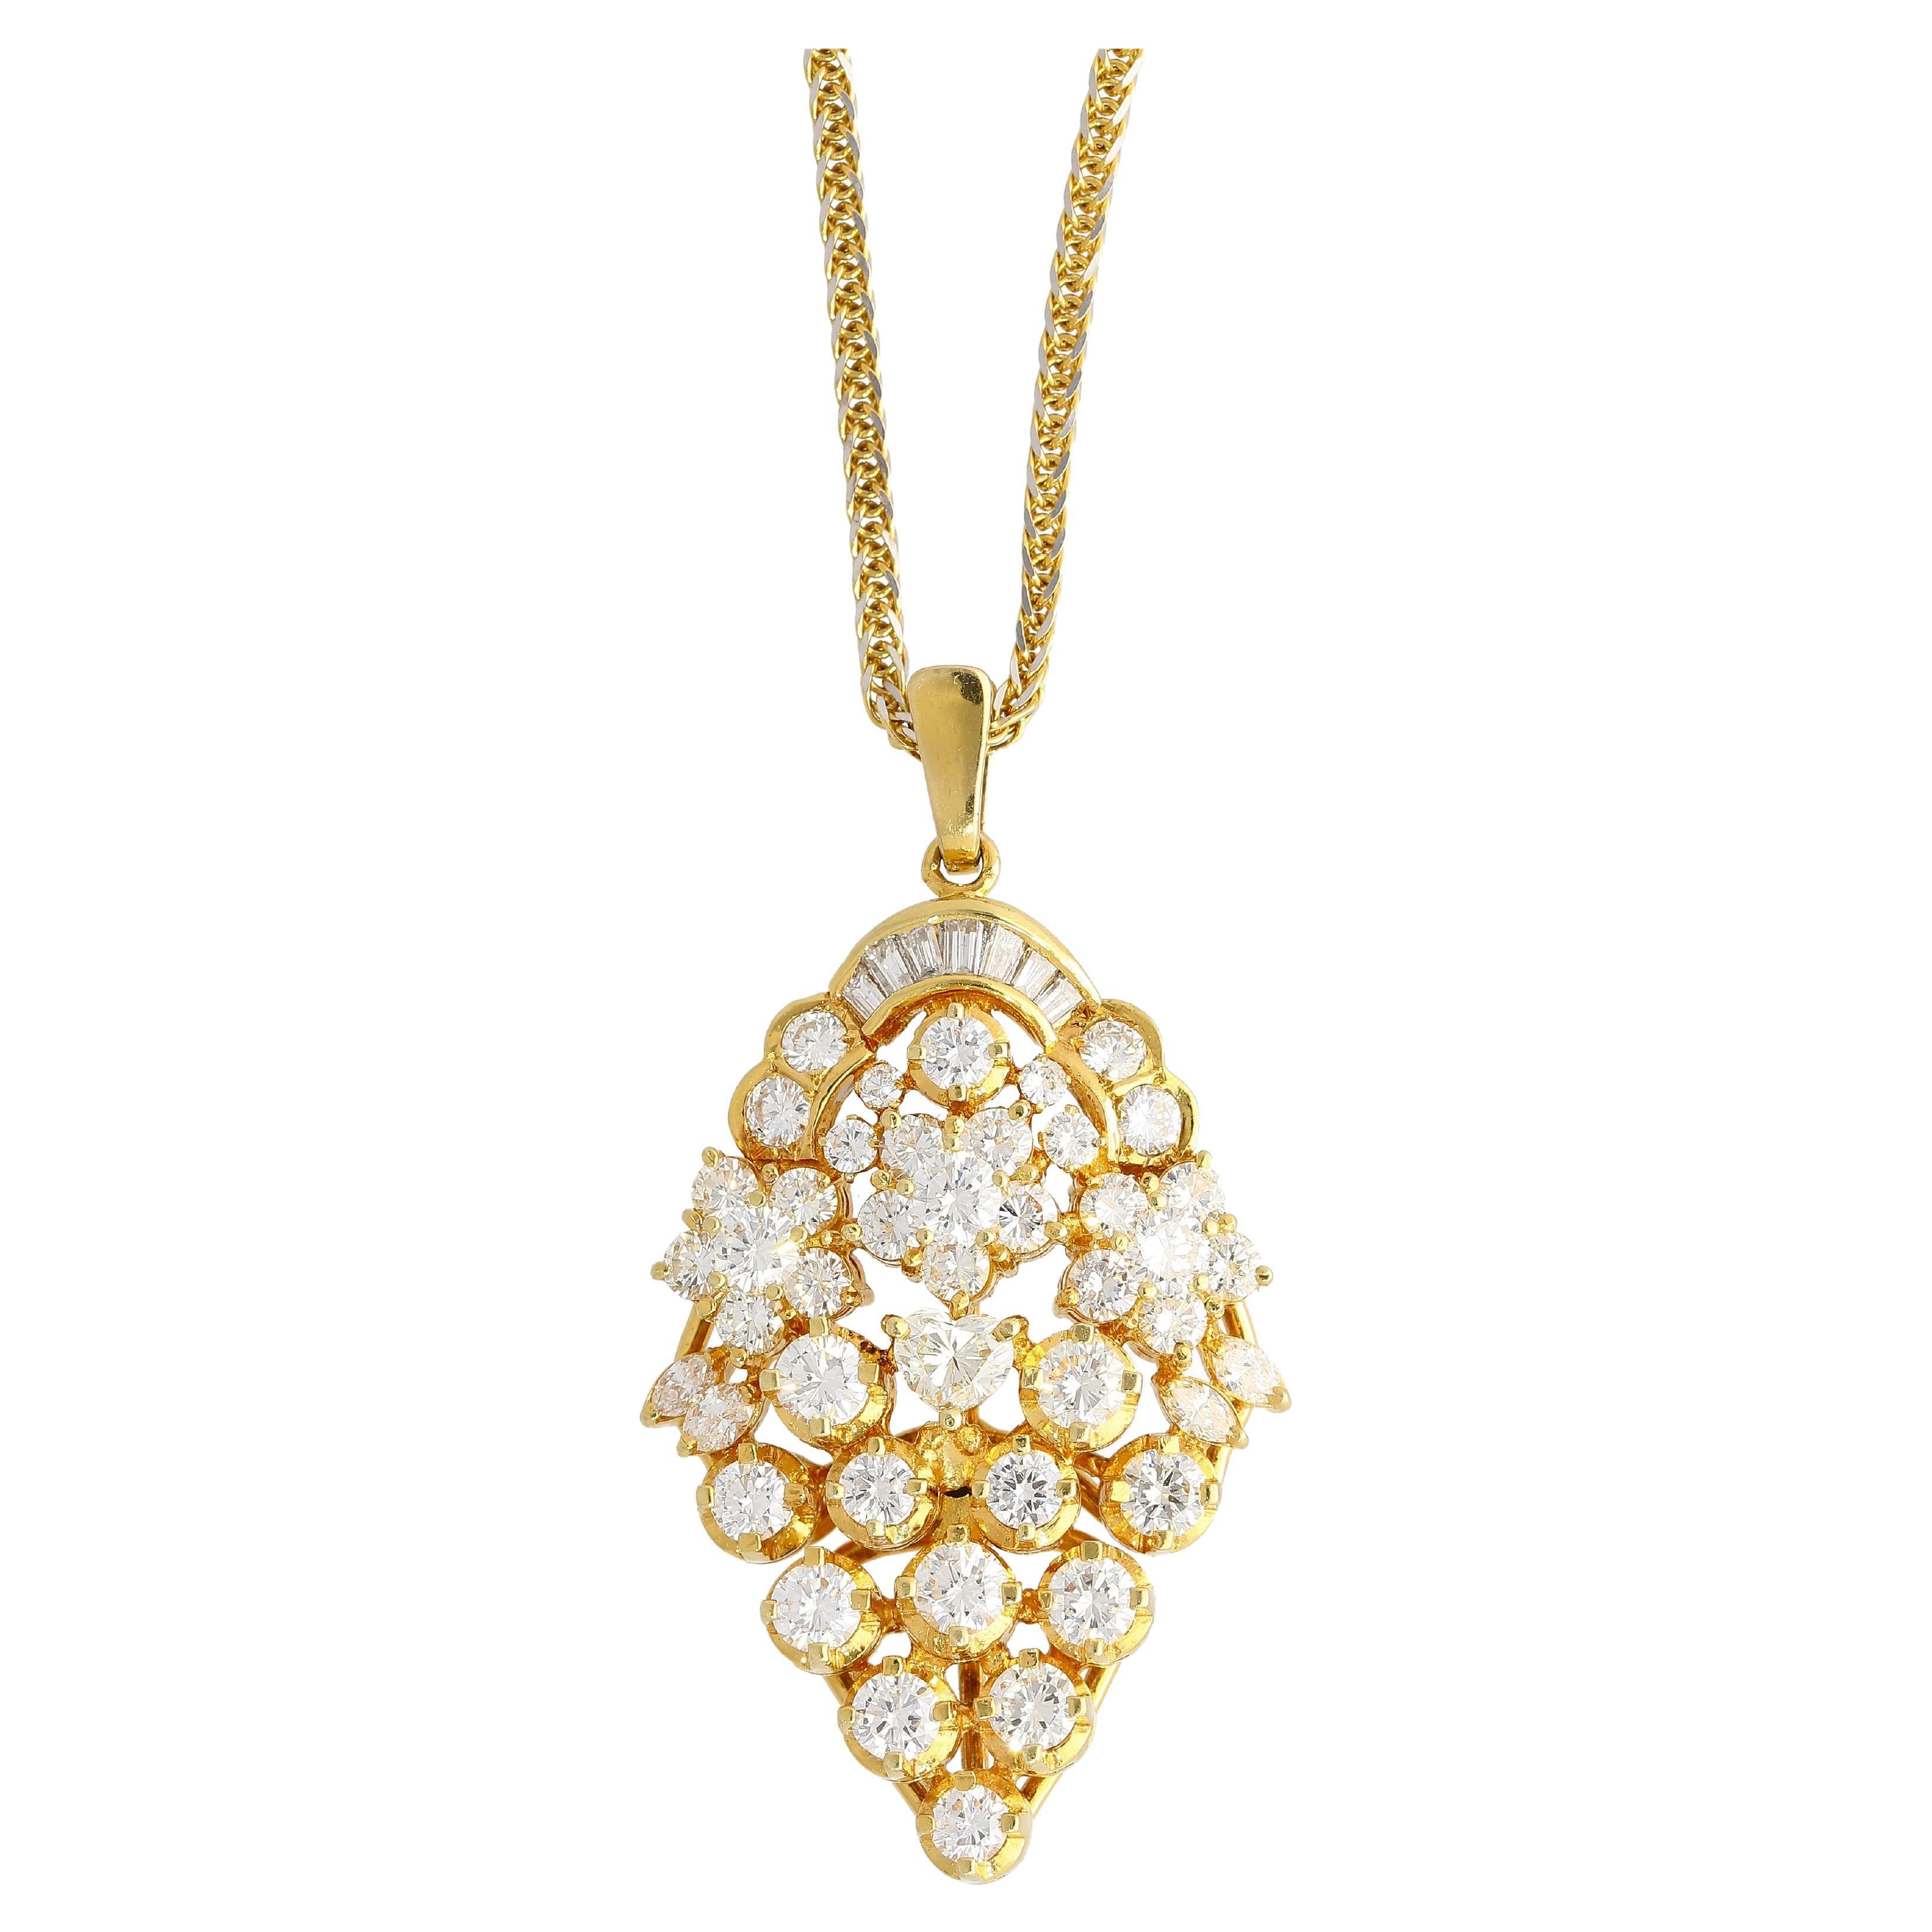 5 CTTW Diamond Cluster Multi Cut Pendant in 18K Yellow Gold Necklace For Sale